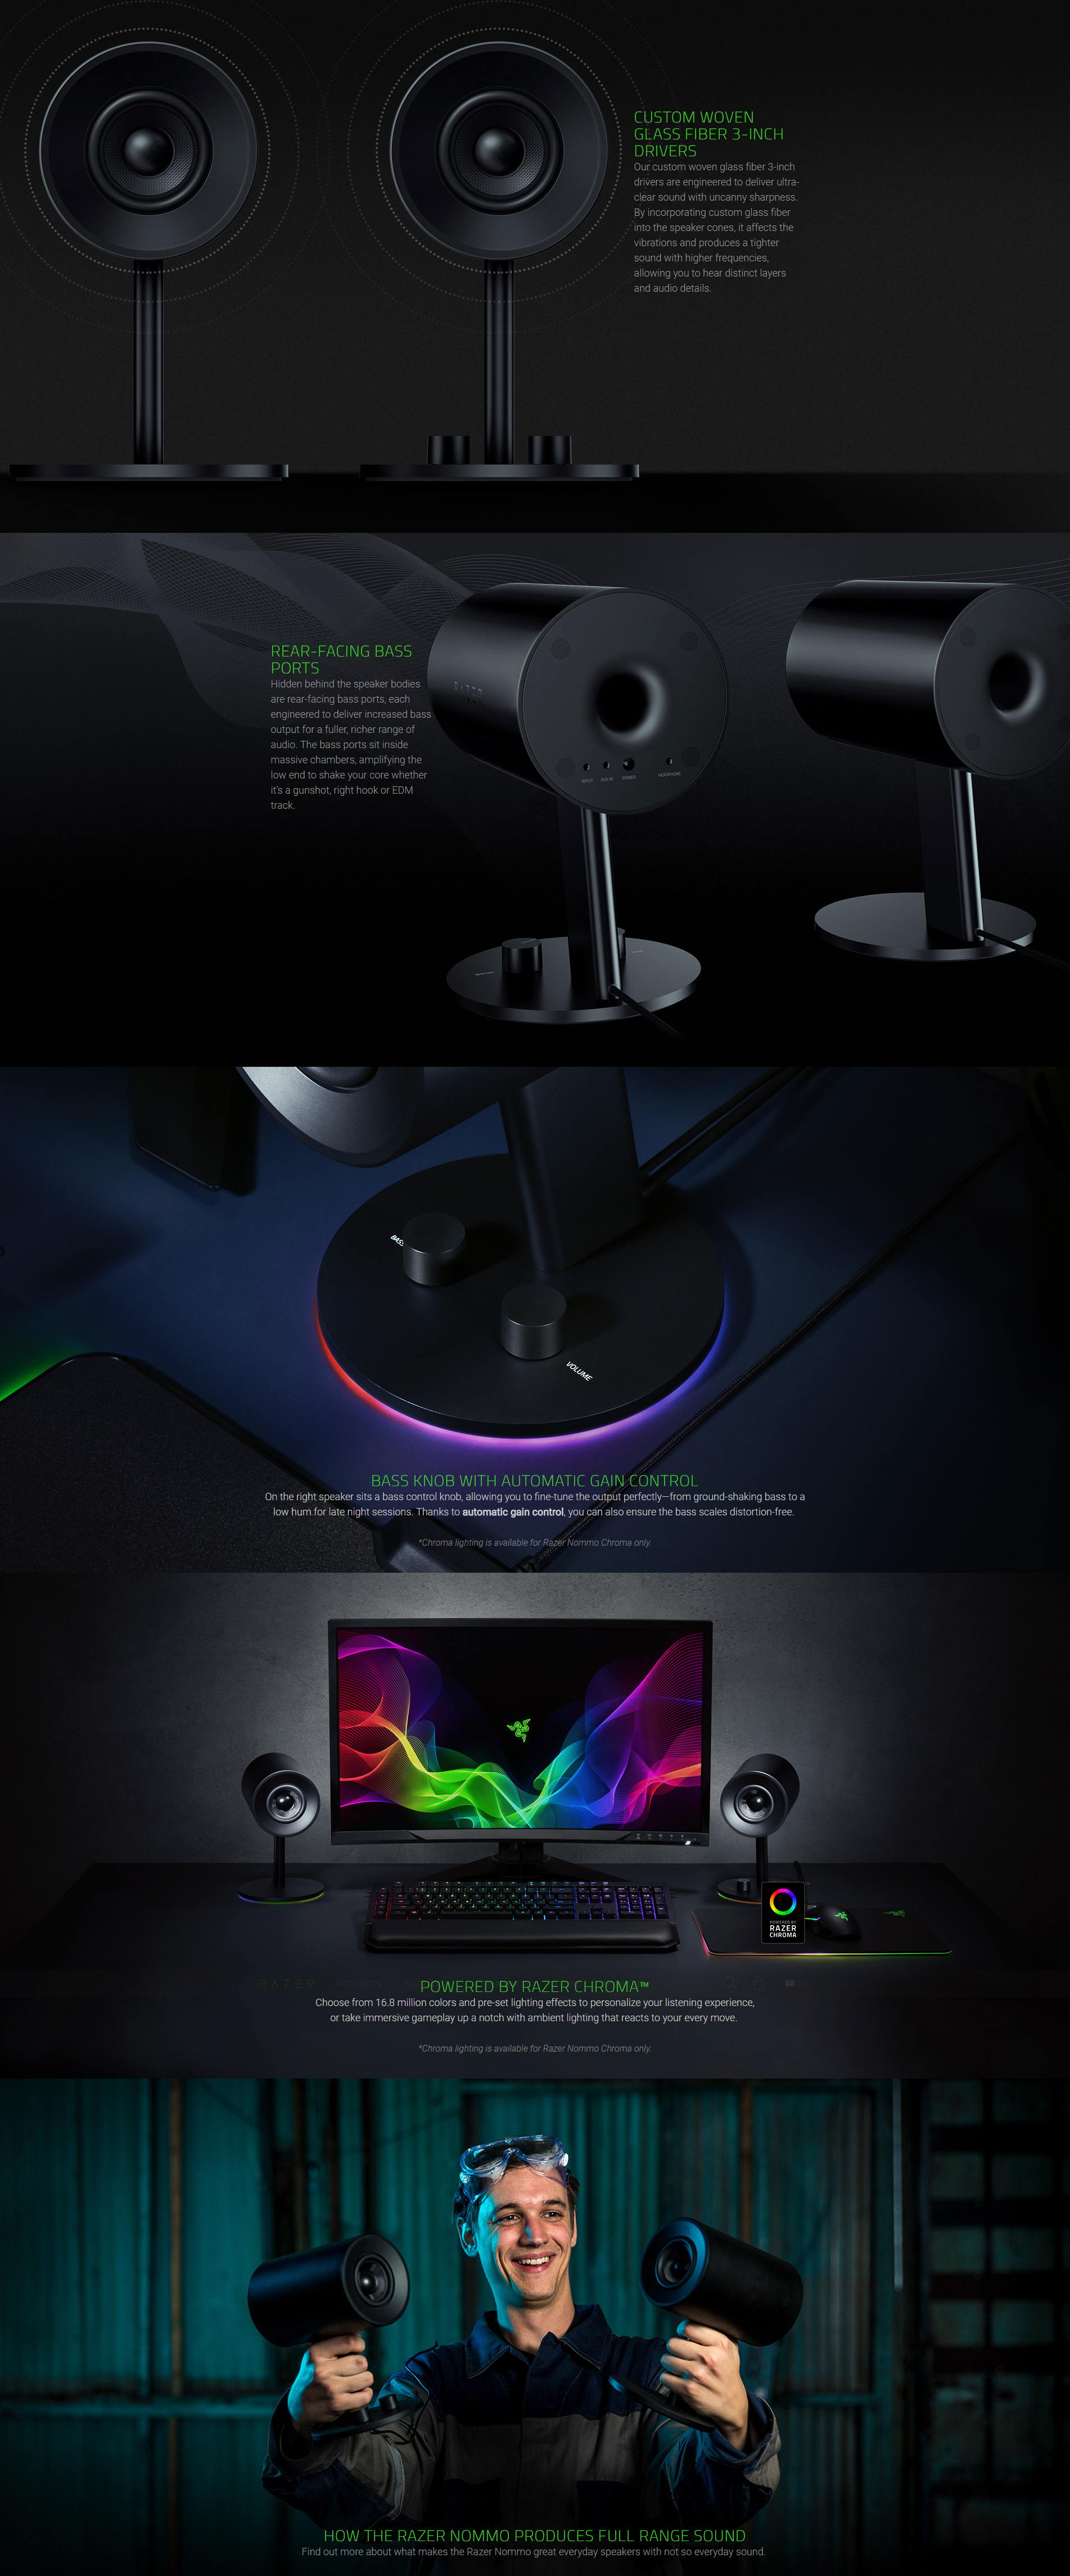 A large marketing image providing additional information about the product Razer Nommo Stereo Gaming Speakers - Additional alt info not provided